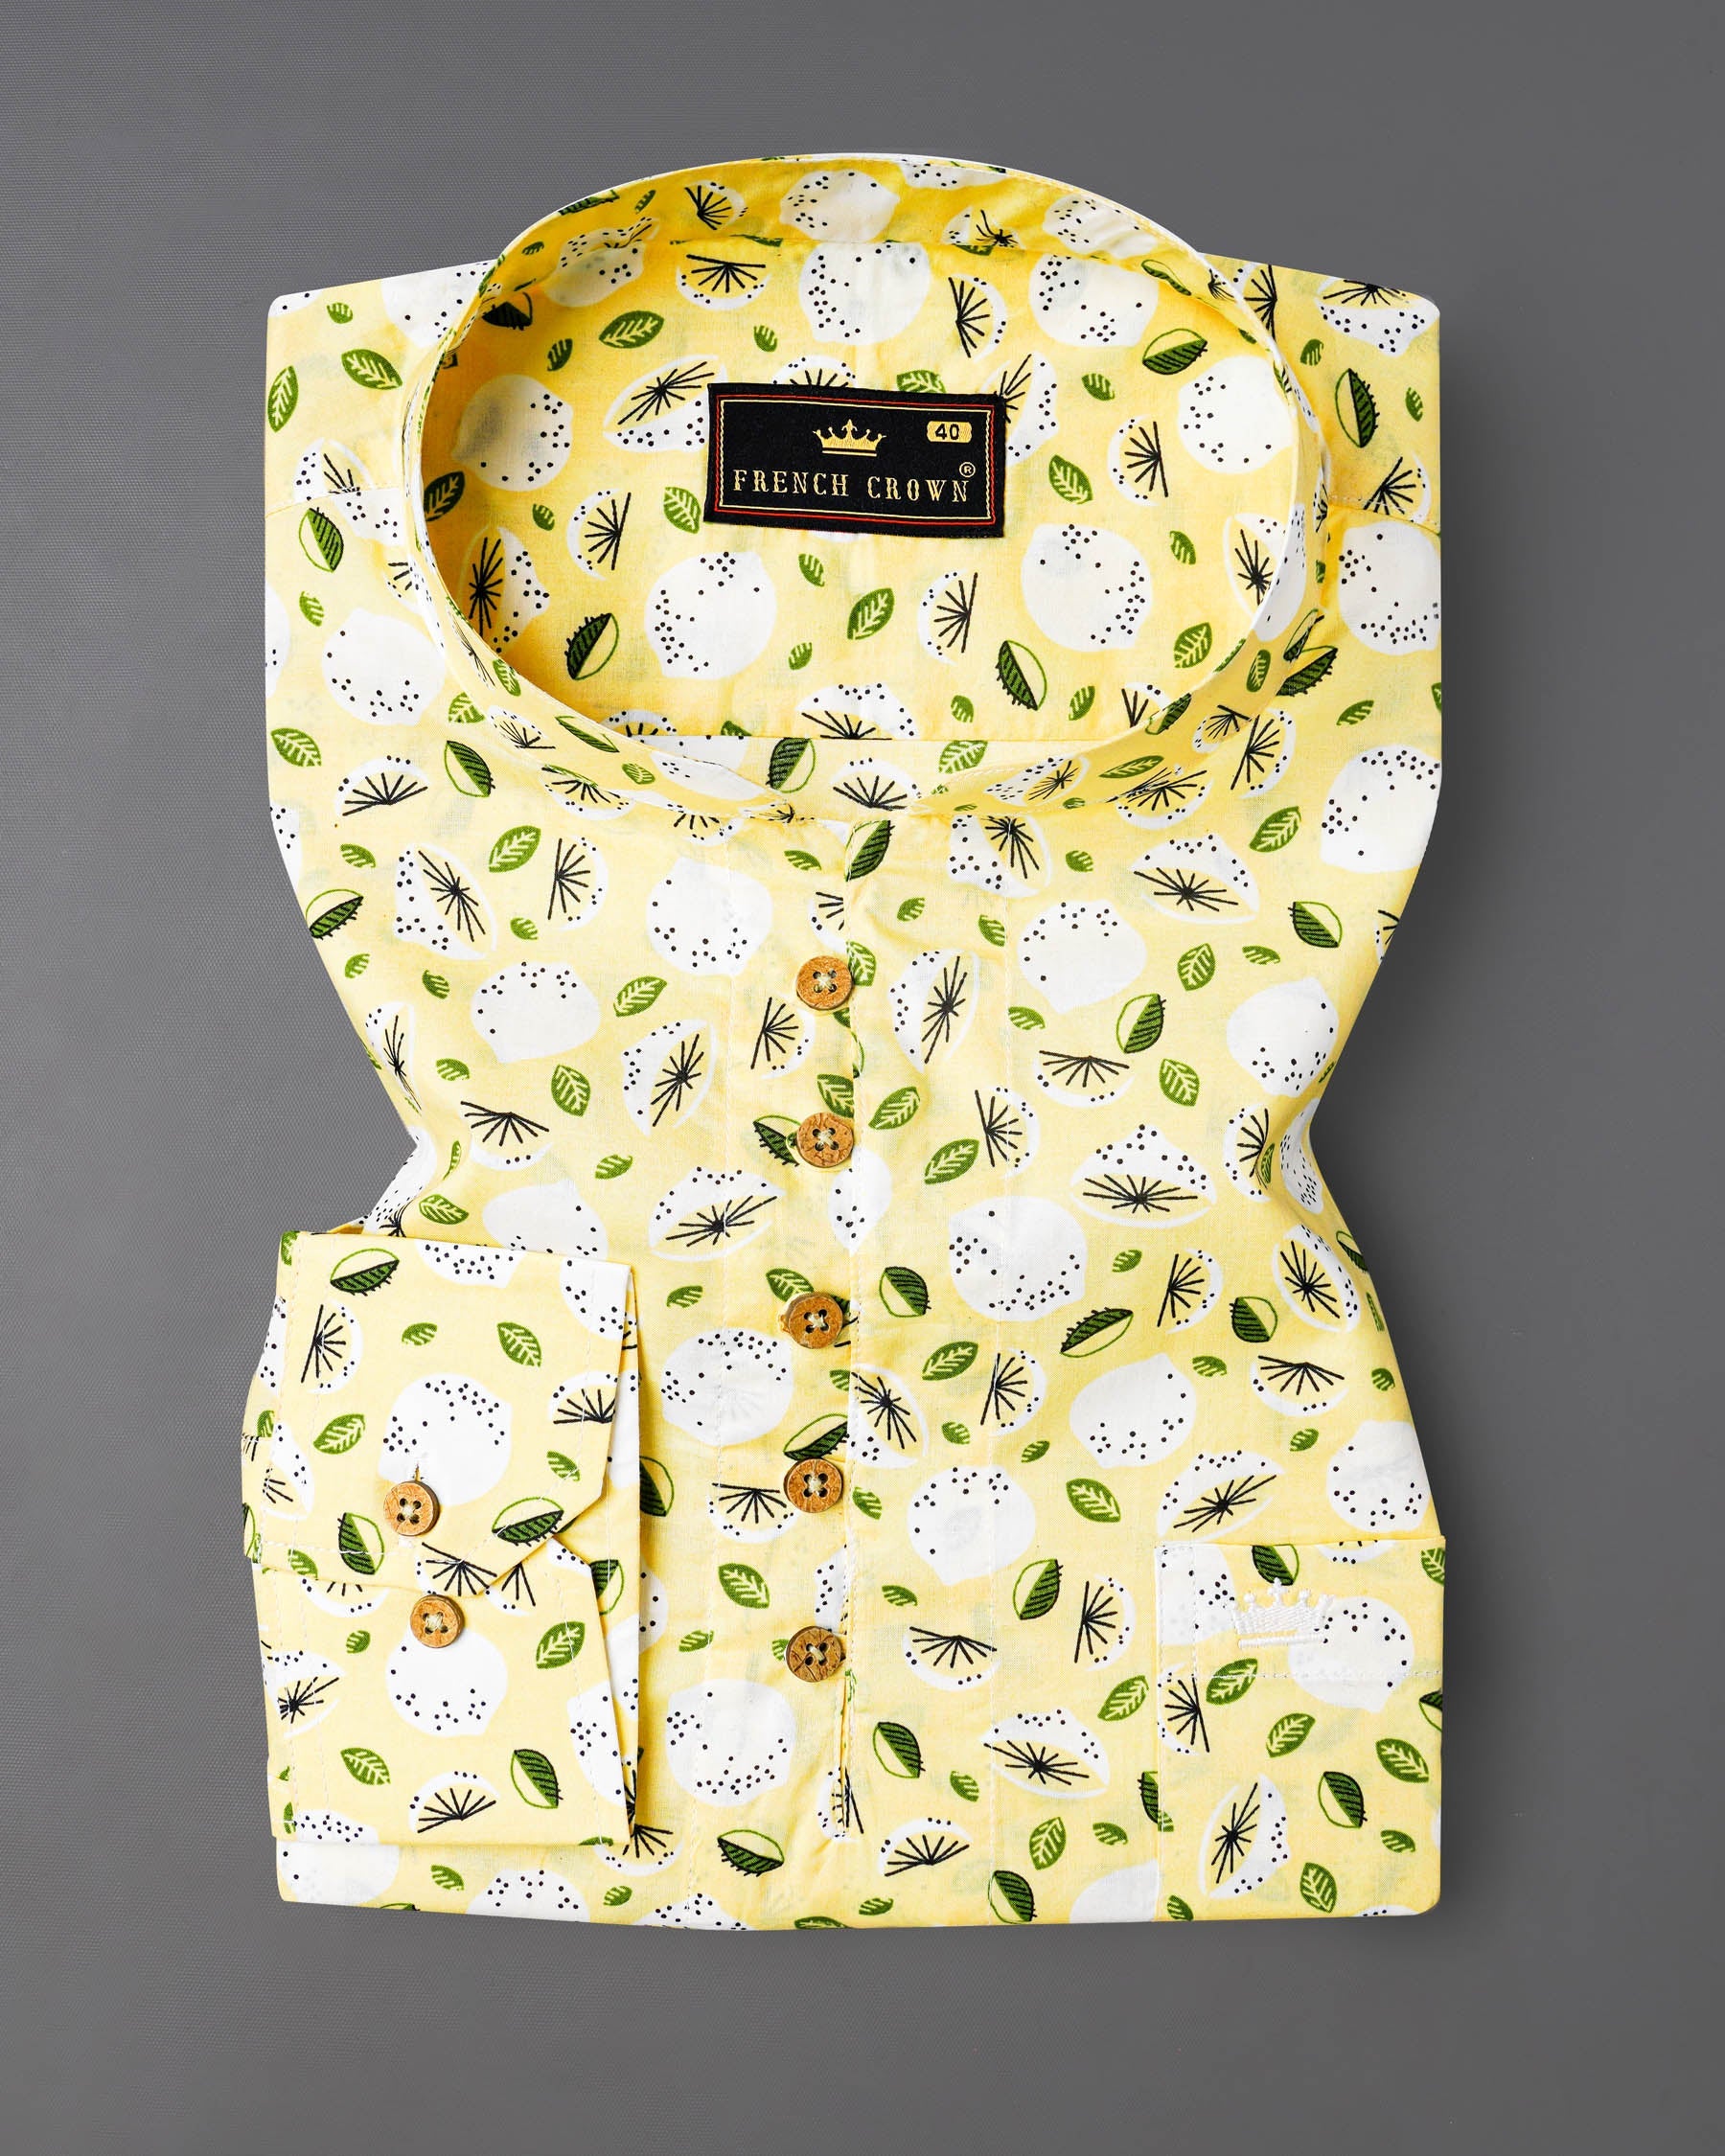 Pale Goldenrod Yellow Floral Printed Premium Cotton Kurta Shirt 7979-KS-38,7979-KS-H-38,7979-KS-39,7979-KS-H-39,7979-KS-40,7979-KS-H-40,7979-KS-42,7979-KS-H-42,7979-KS-44,7979-KS-H-44,7979-KS-46,7979-KS-H-46,7979-KS-48,7979-KS-H-48,7979-KS-50,7979-KS-H-50,7979-KS-52,7979-KS-H-52